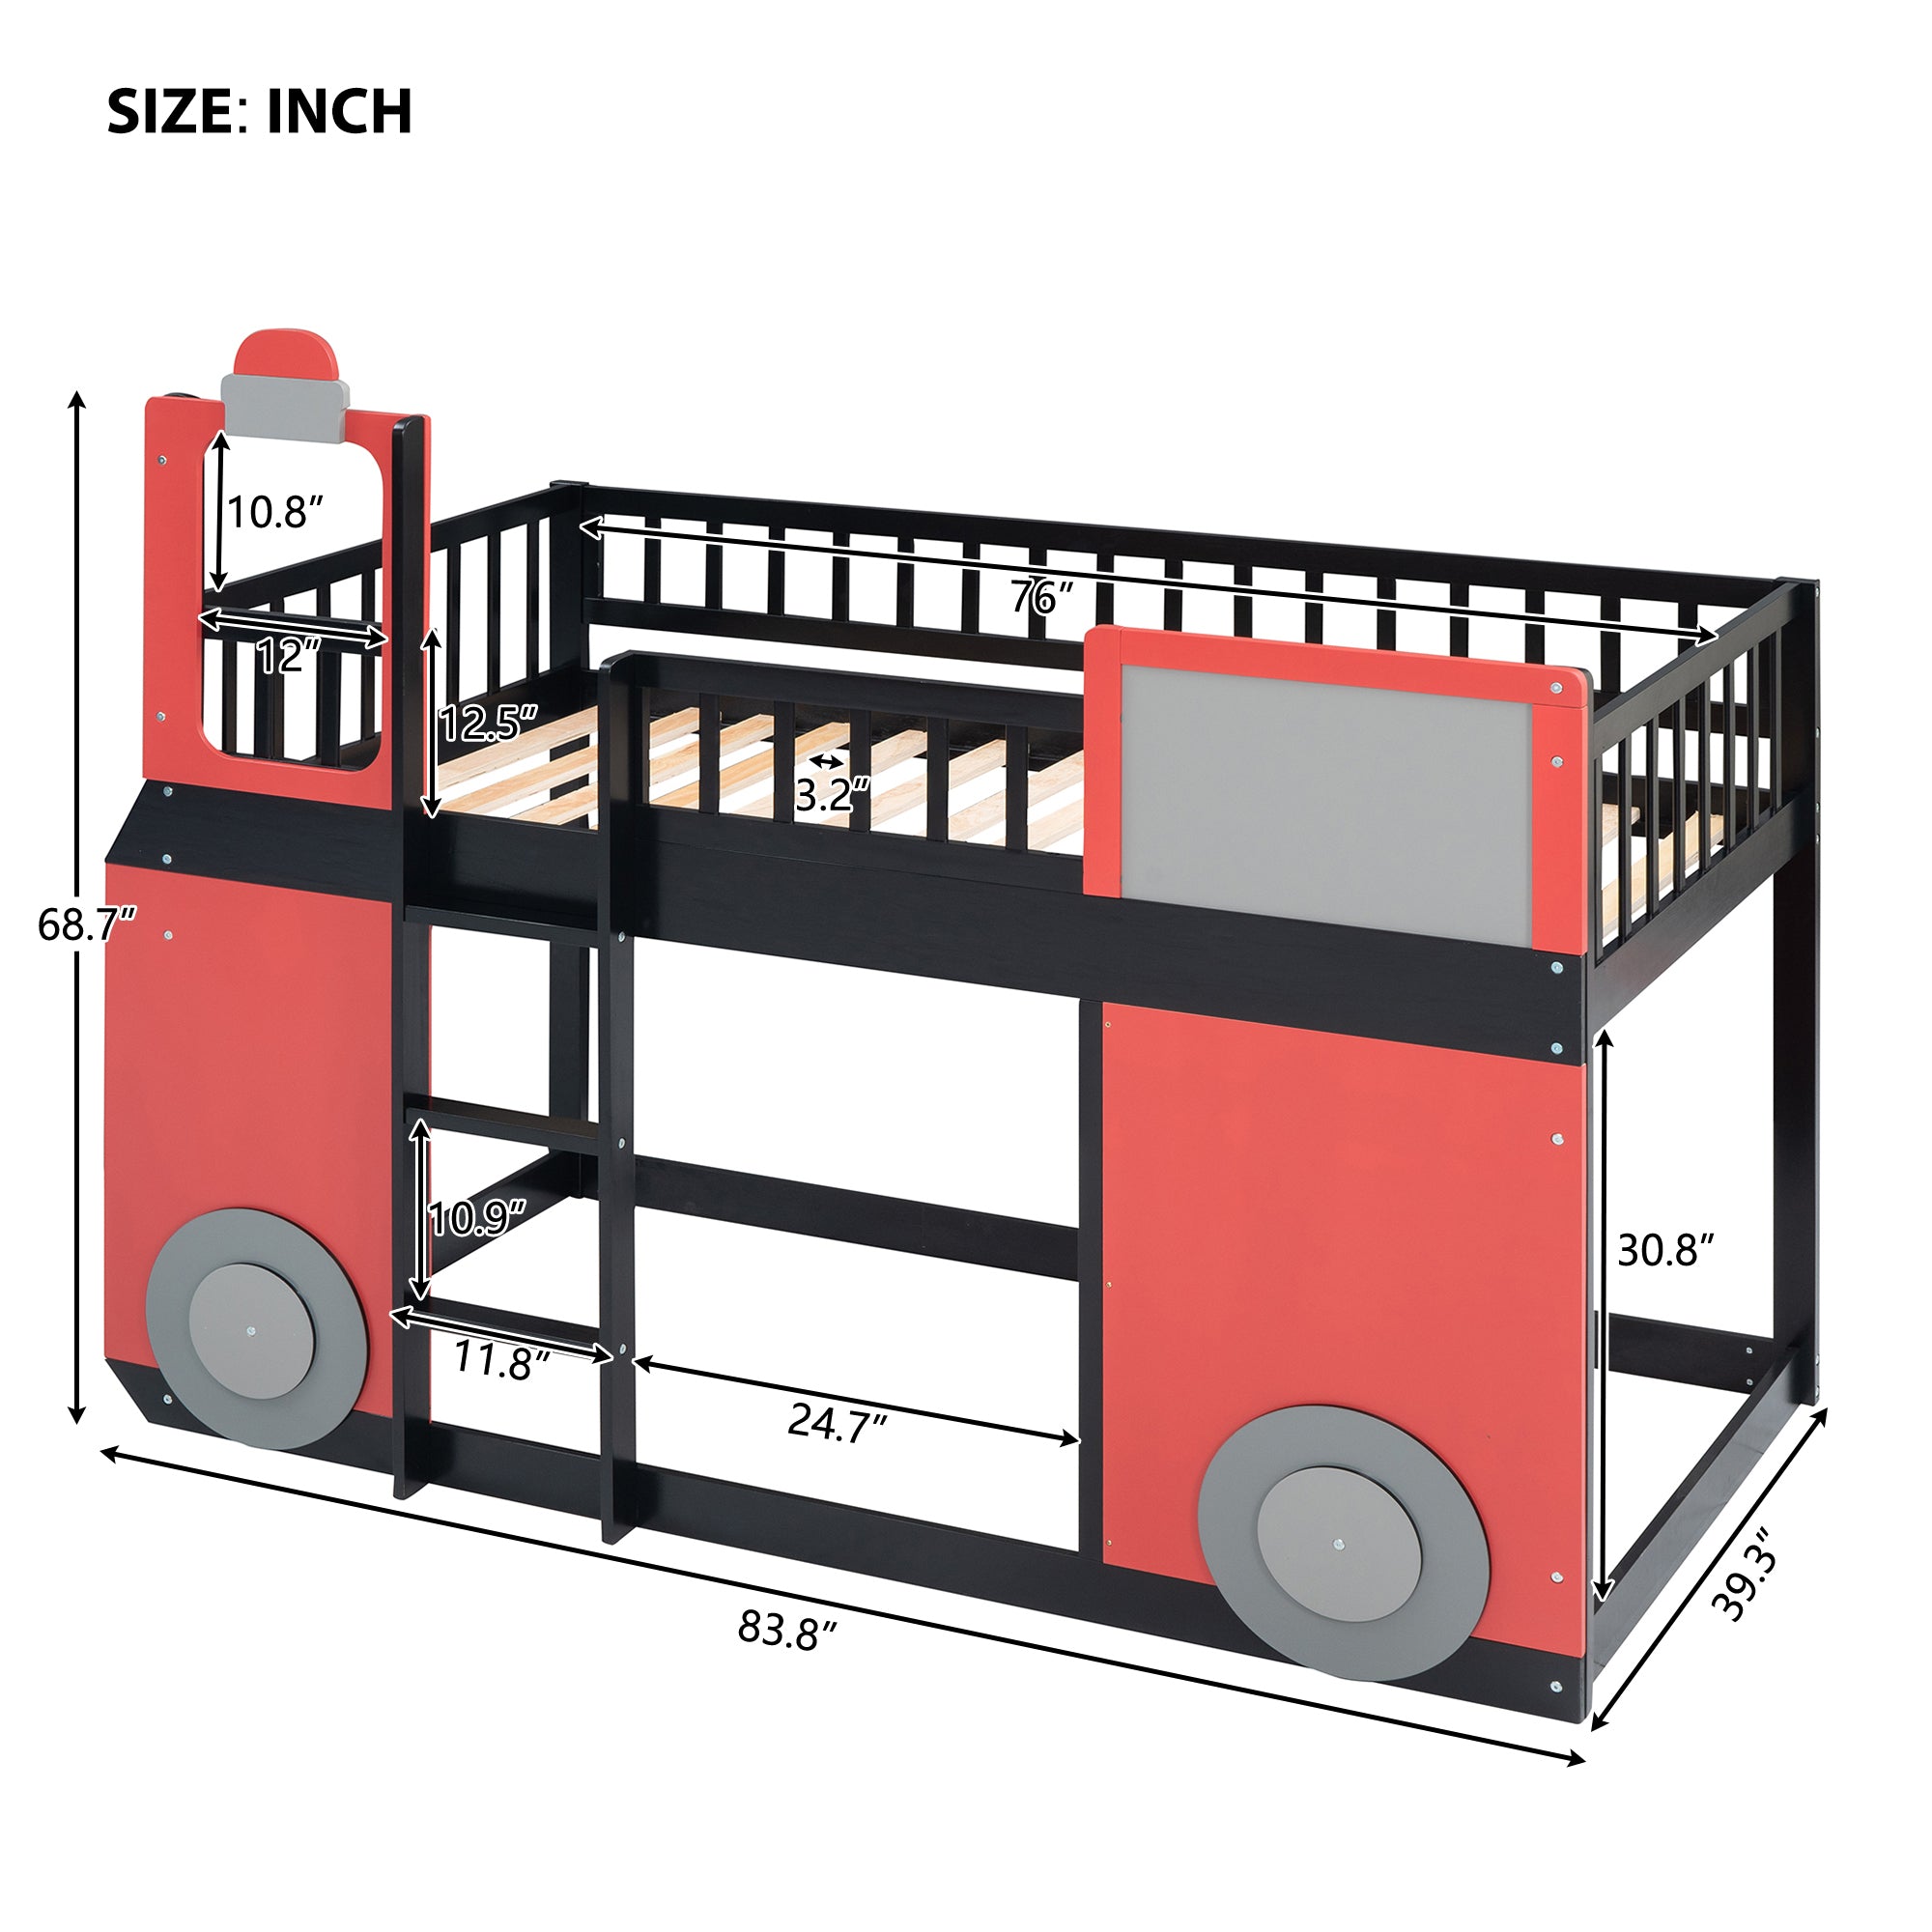 Train Shape Design Twin size Loft Bed Wooden Bed (Red)